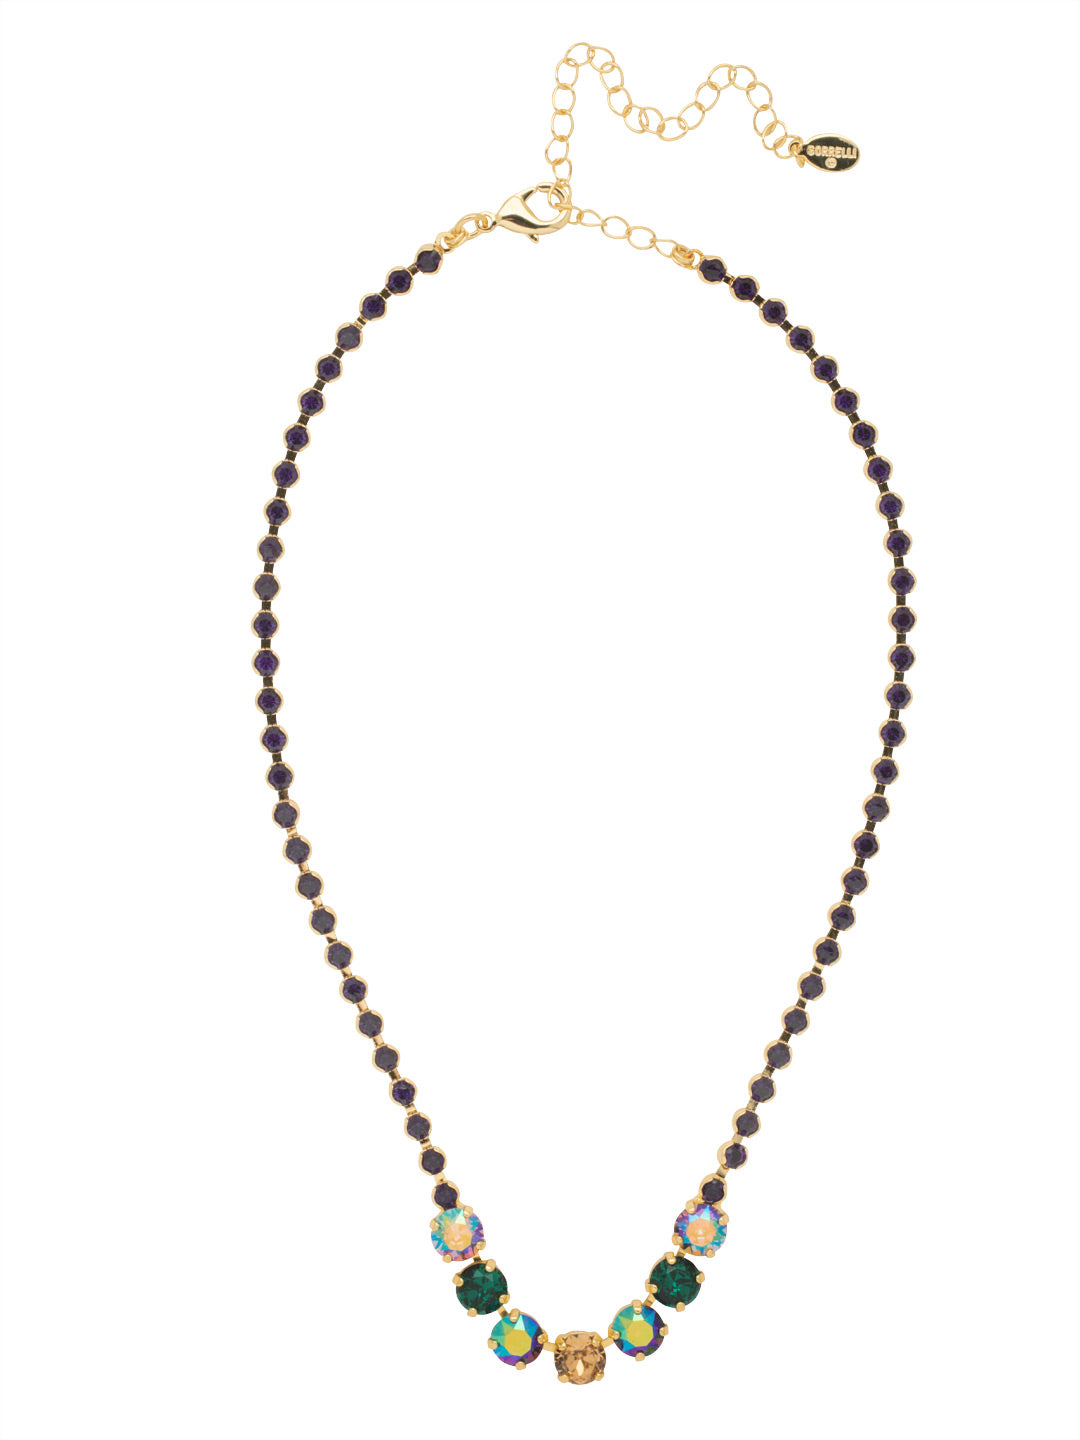 Coco Tennis Necklace - NEZ31BGMDG - <p>The Coco Tennis necklace shines all around; a crystal studded adjustable chain hosts a row of round crystals, secured in the back with a lobster claw clasp. From Sorrelli's Mardi Gras collection in our Bright Gold-tone finish.</p>